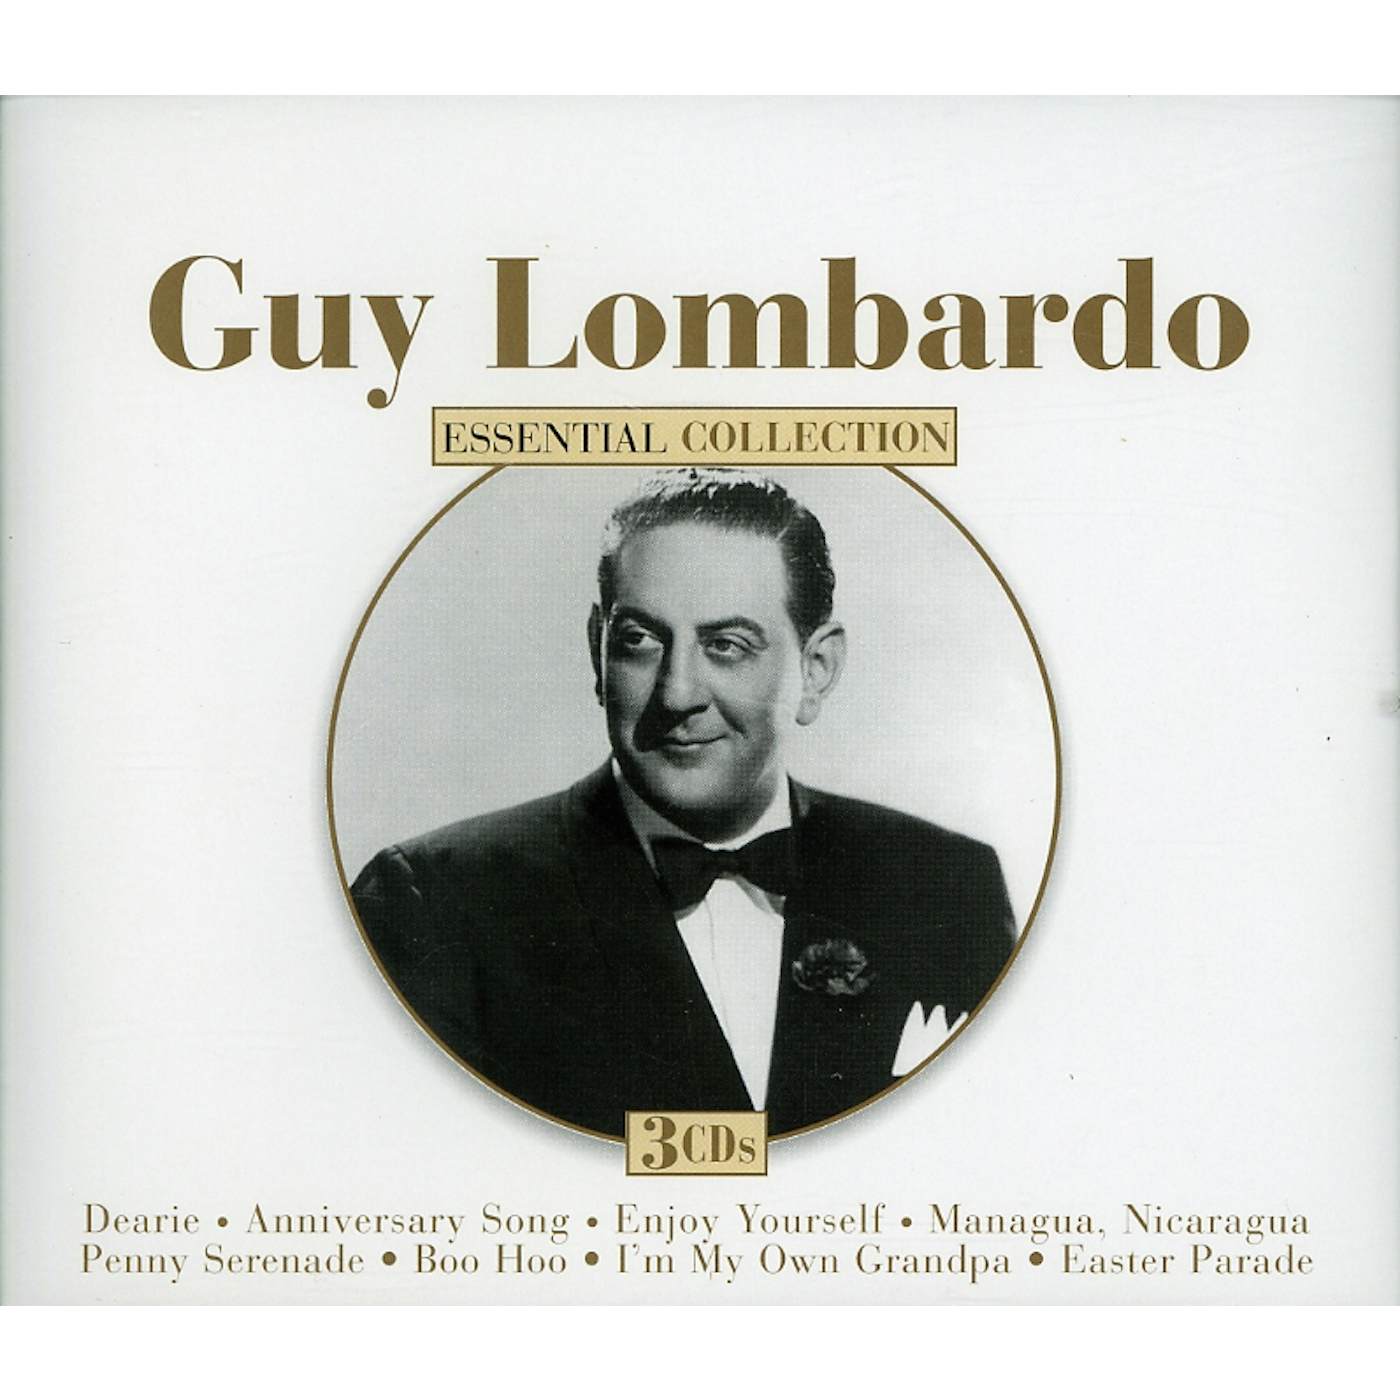 Guy Lombardo ESSENTIAL COLLECTION CD